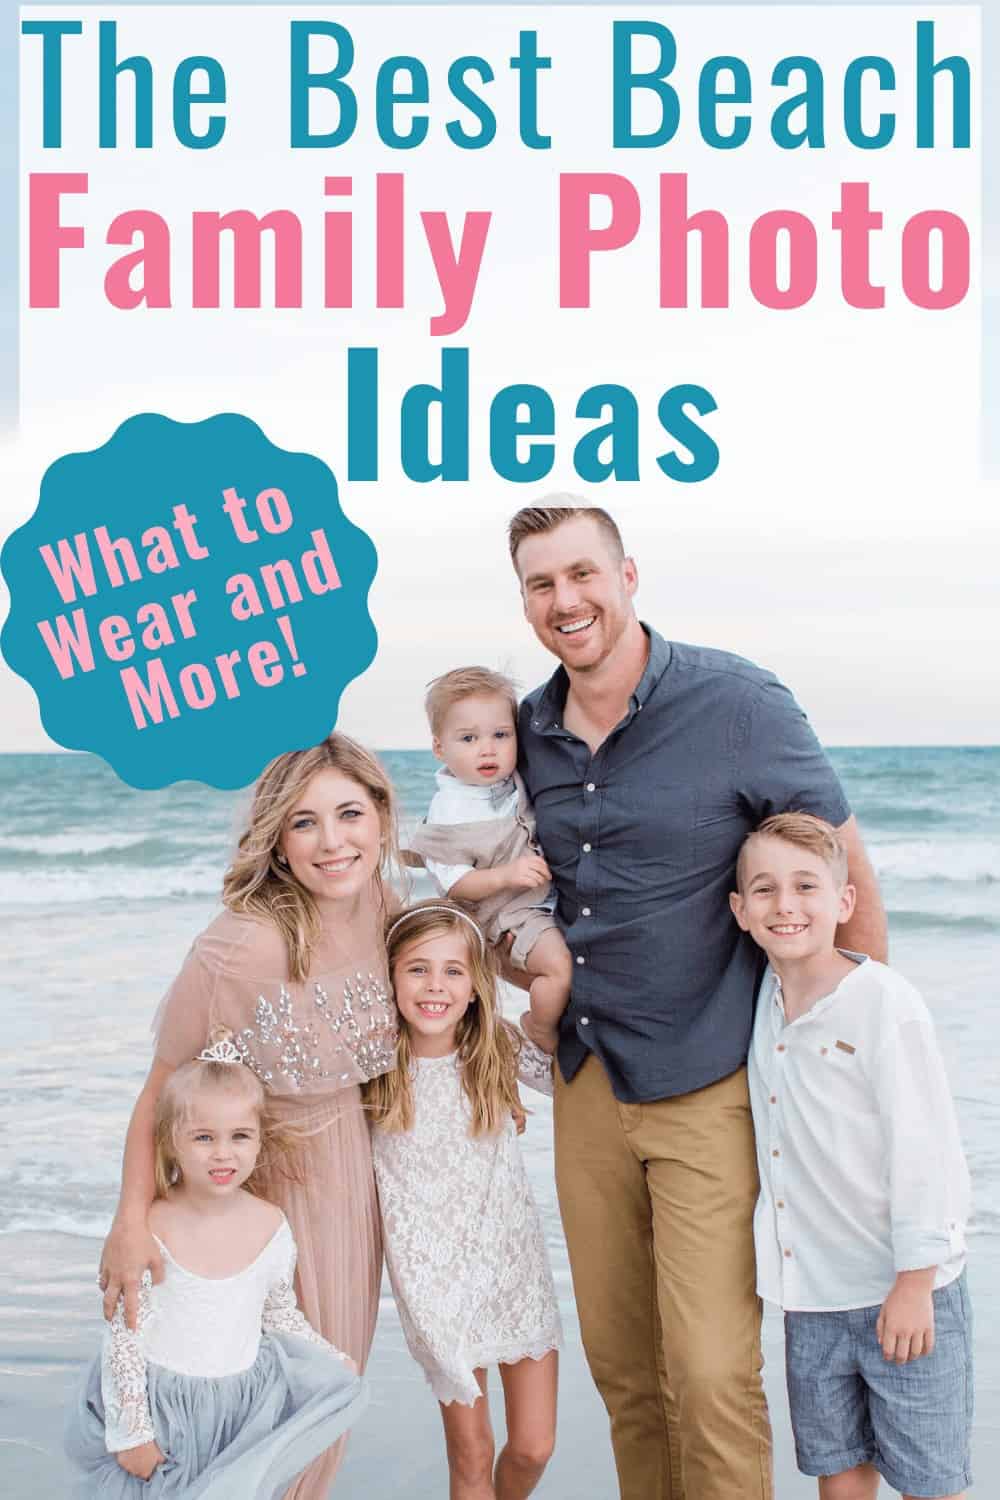 Best Beach Family Photo Ideas: Tips for Getting the Best Pictures